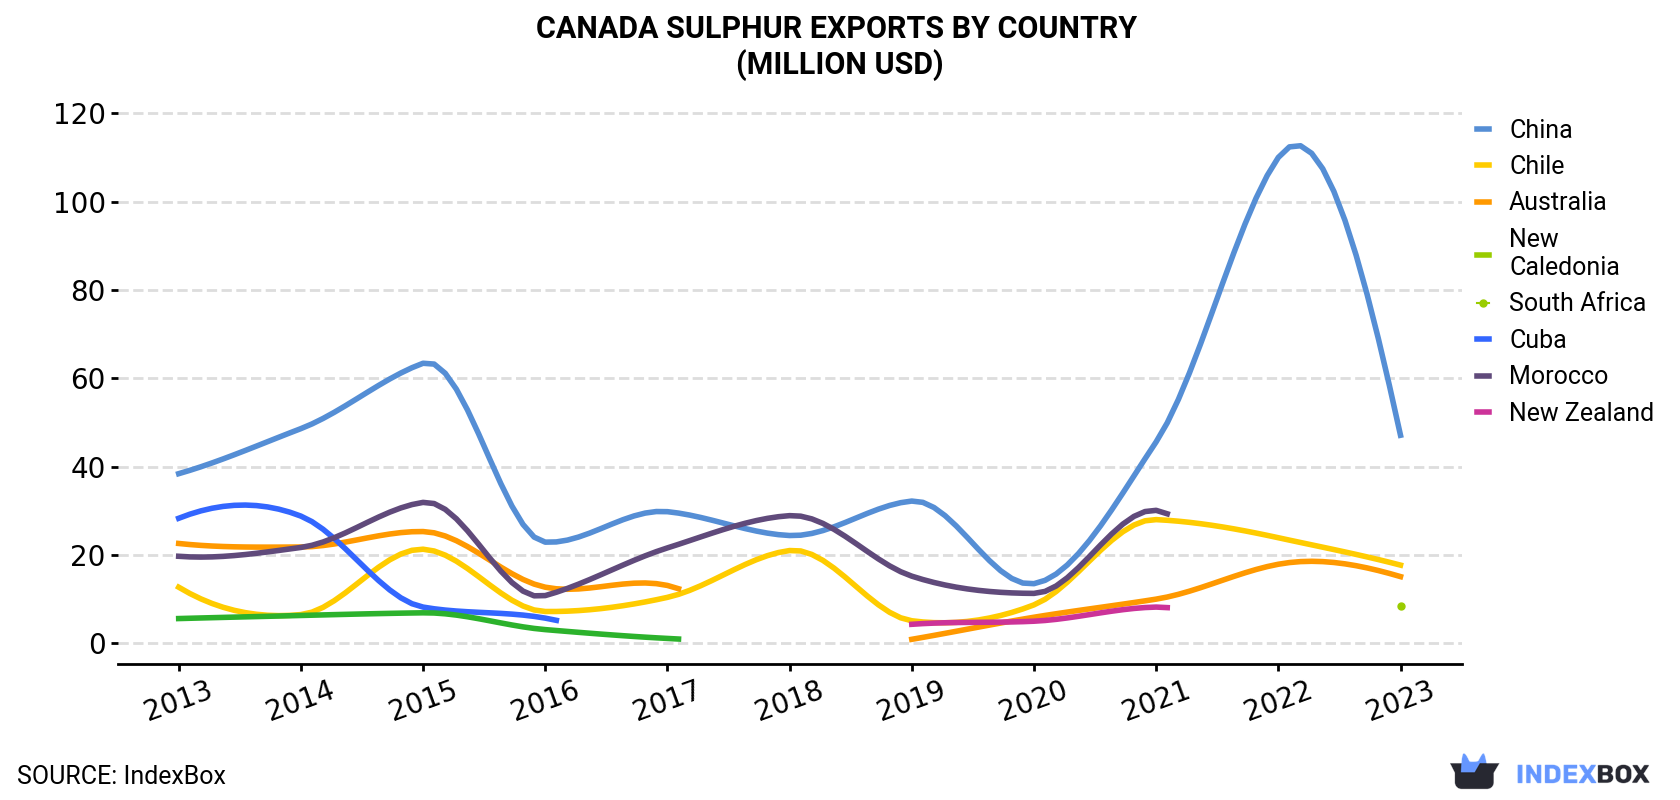 Canada Sulphur Exports By Country (Million USD)